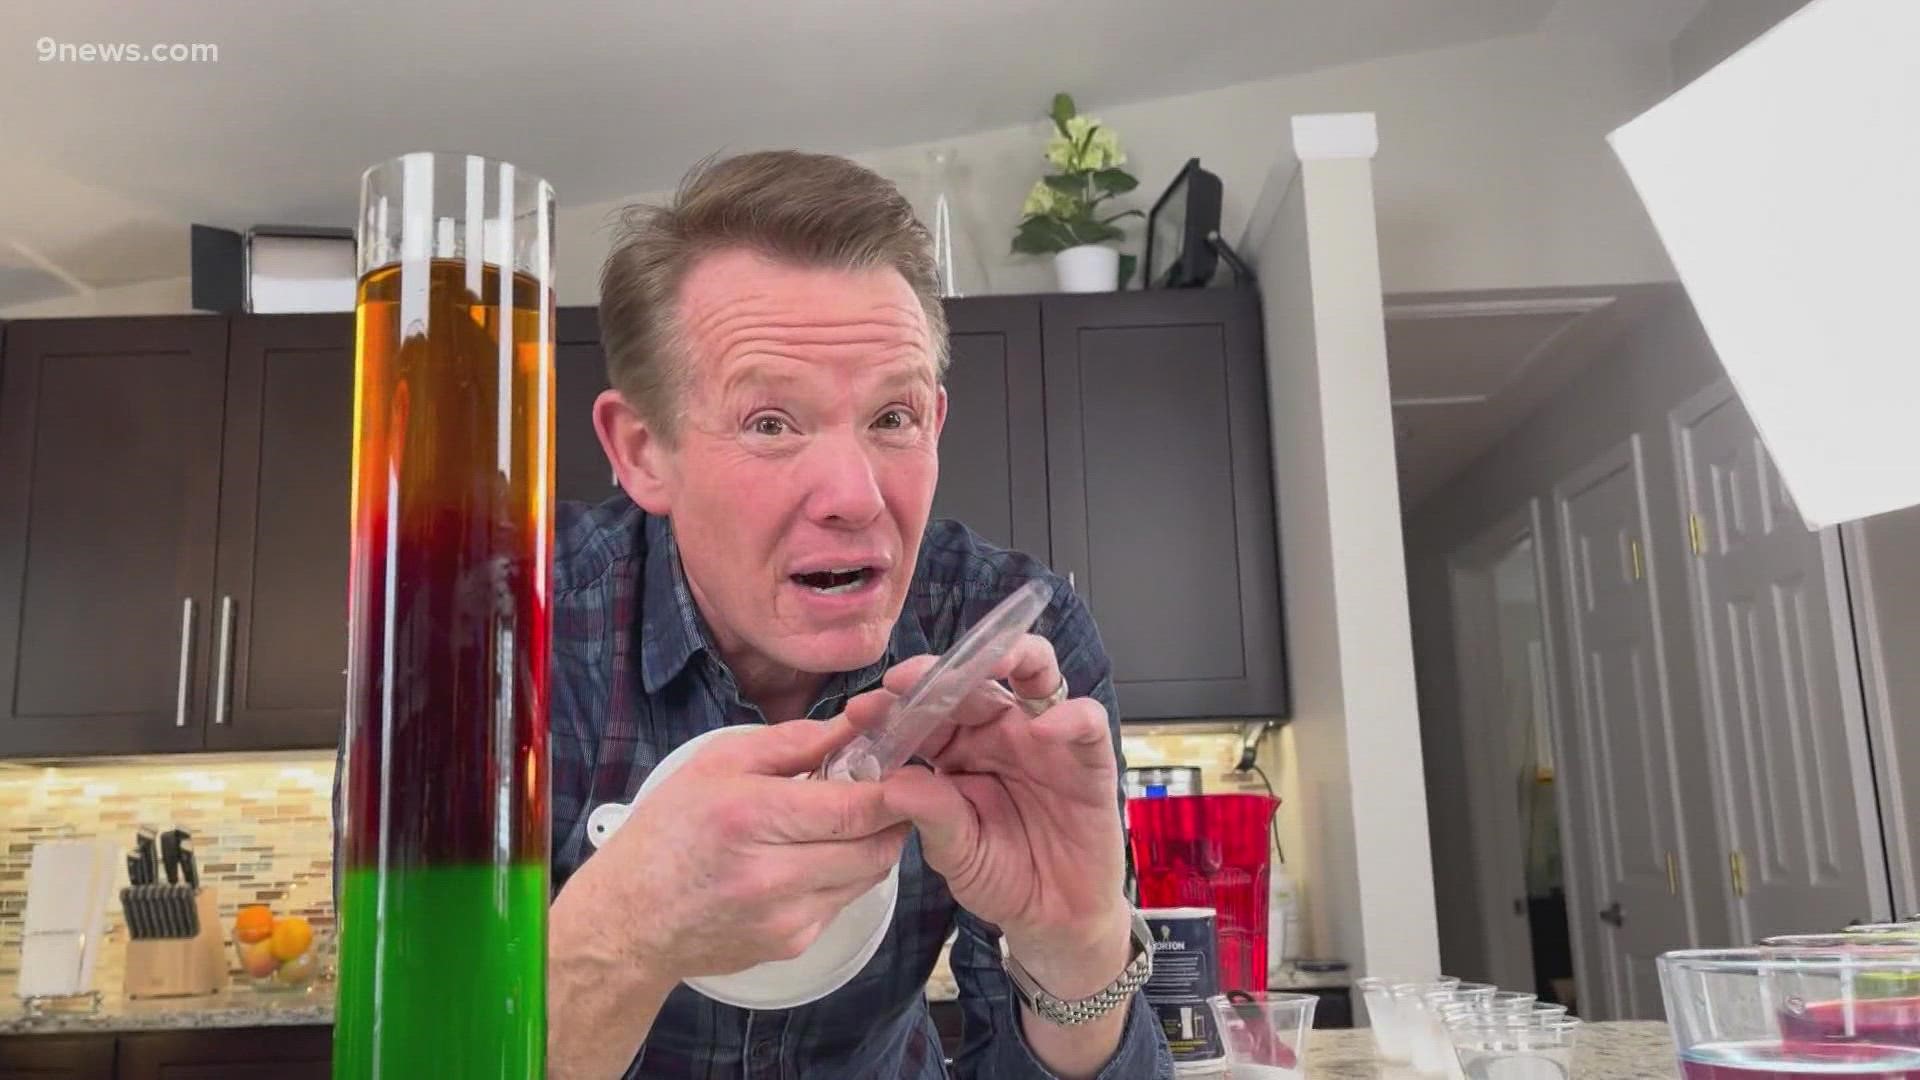 Steve Spangler shows us how to use density to stack colored liquids on top of each other.